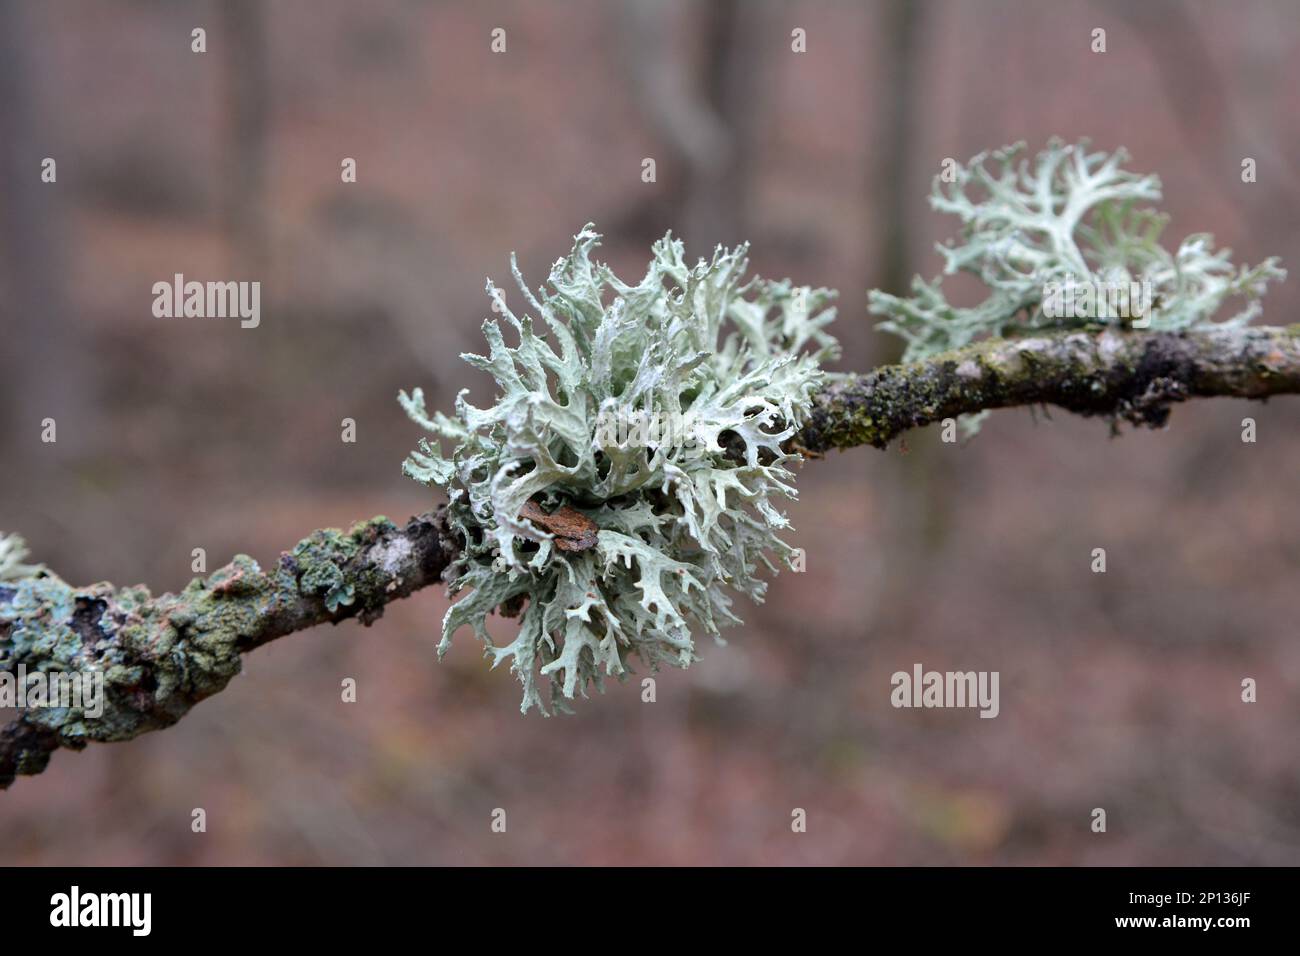 Lichen Evernia prunastri from the genus Evernia of the family Parmeliaceae (Parmeliaceae) grows in the wild Stock Photo